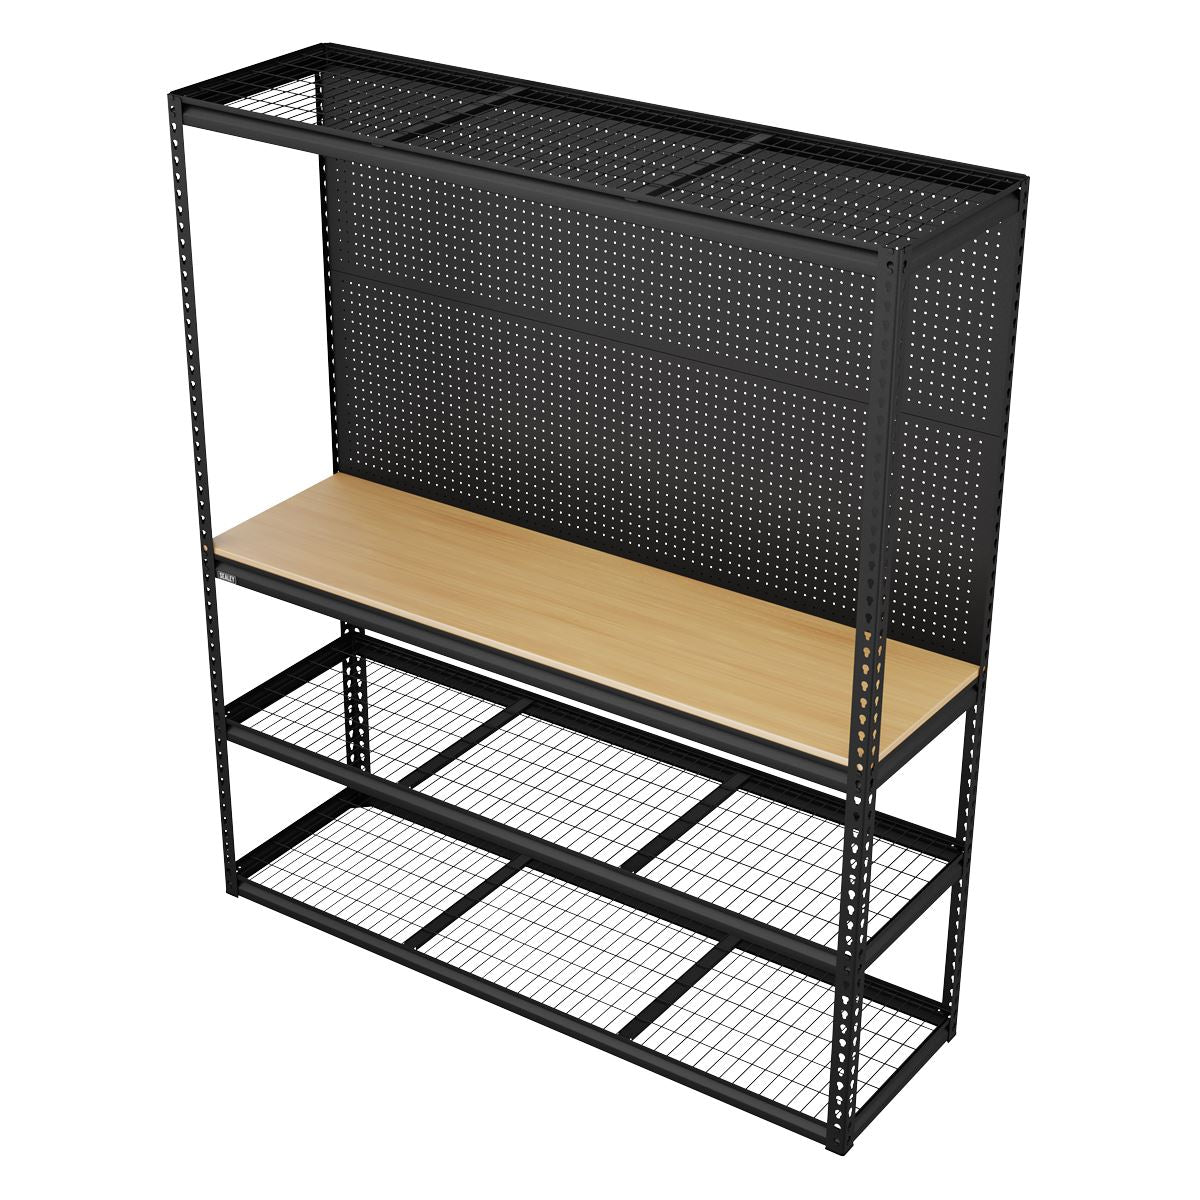 Sealey Heavy-Duty Modular Workbench with Racking & Pegboard 300kg Capacity Per Level 1820mm